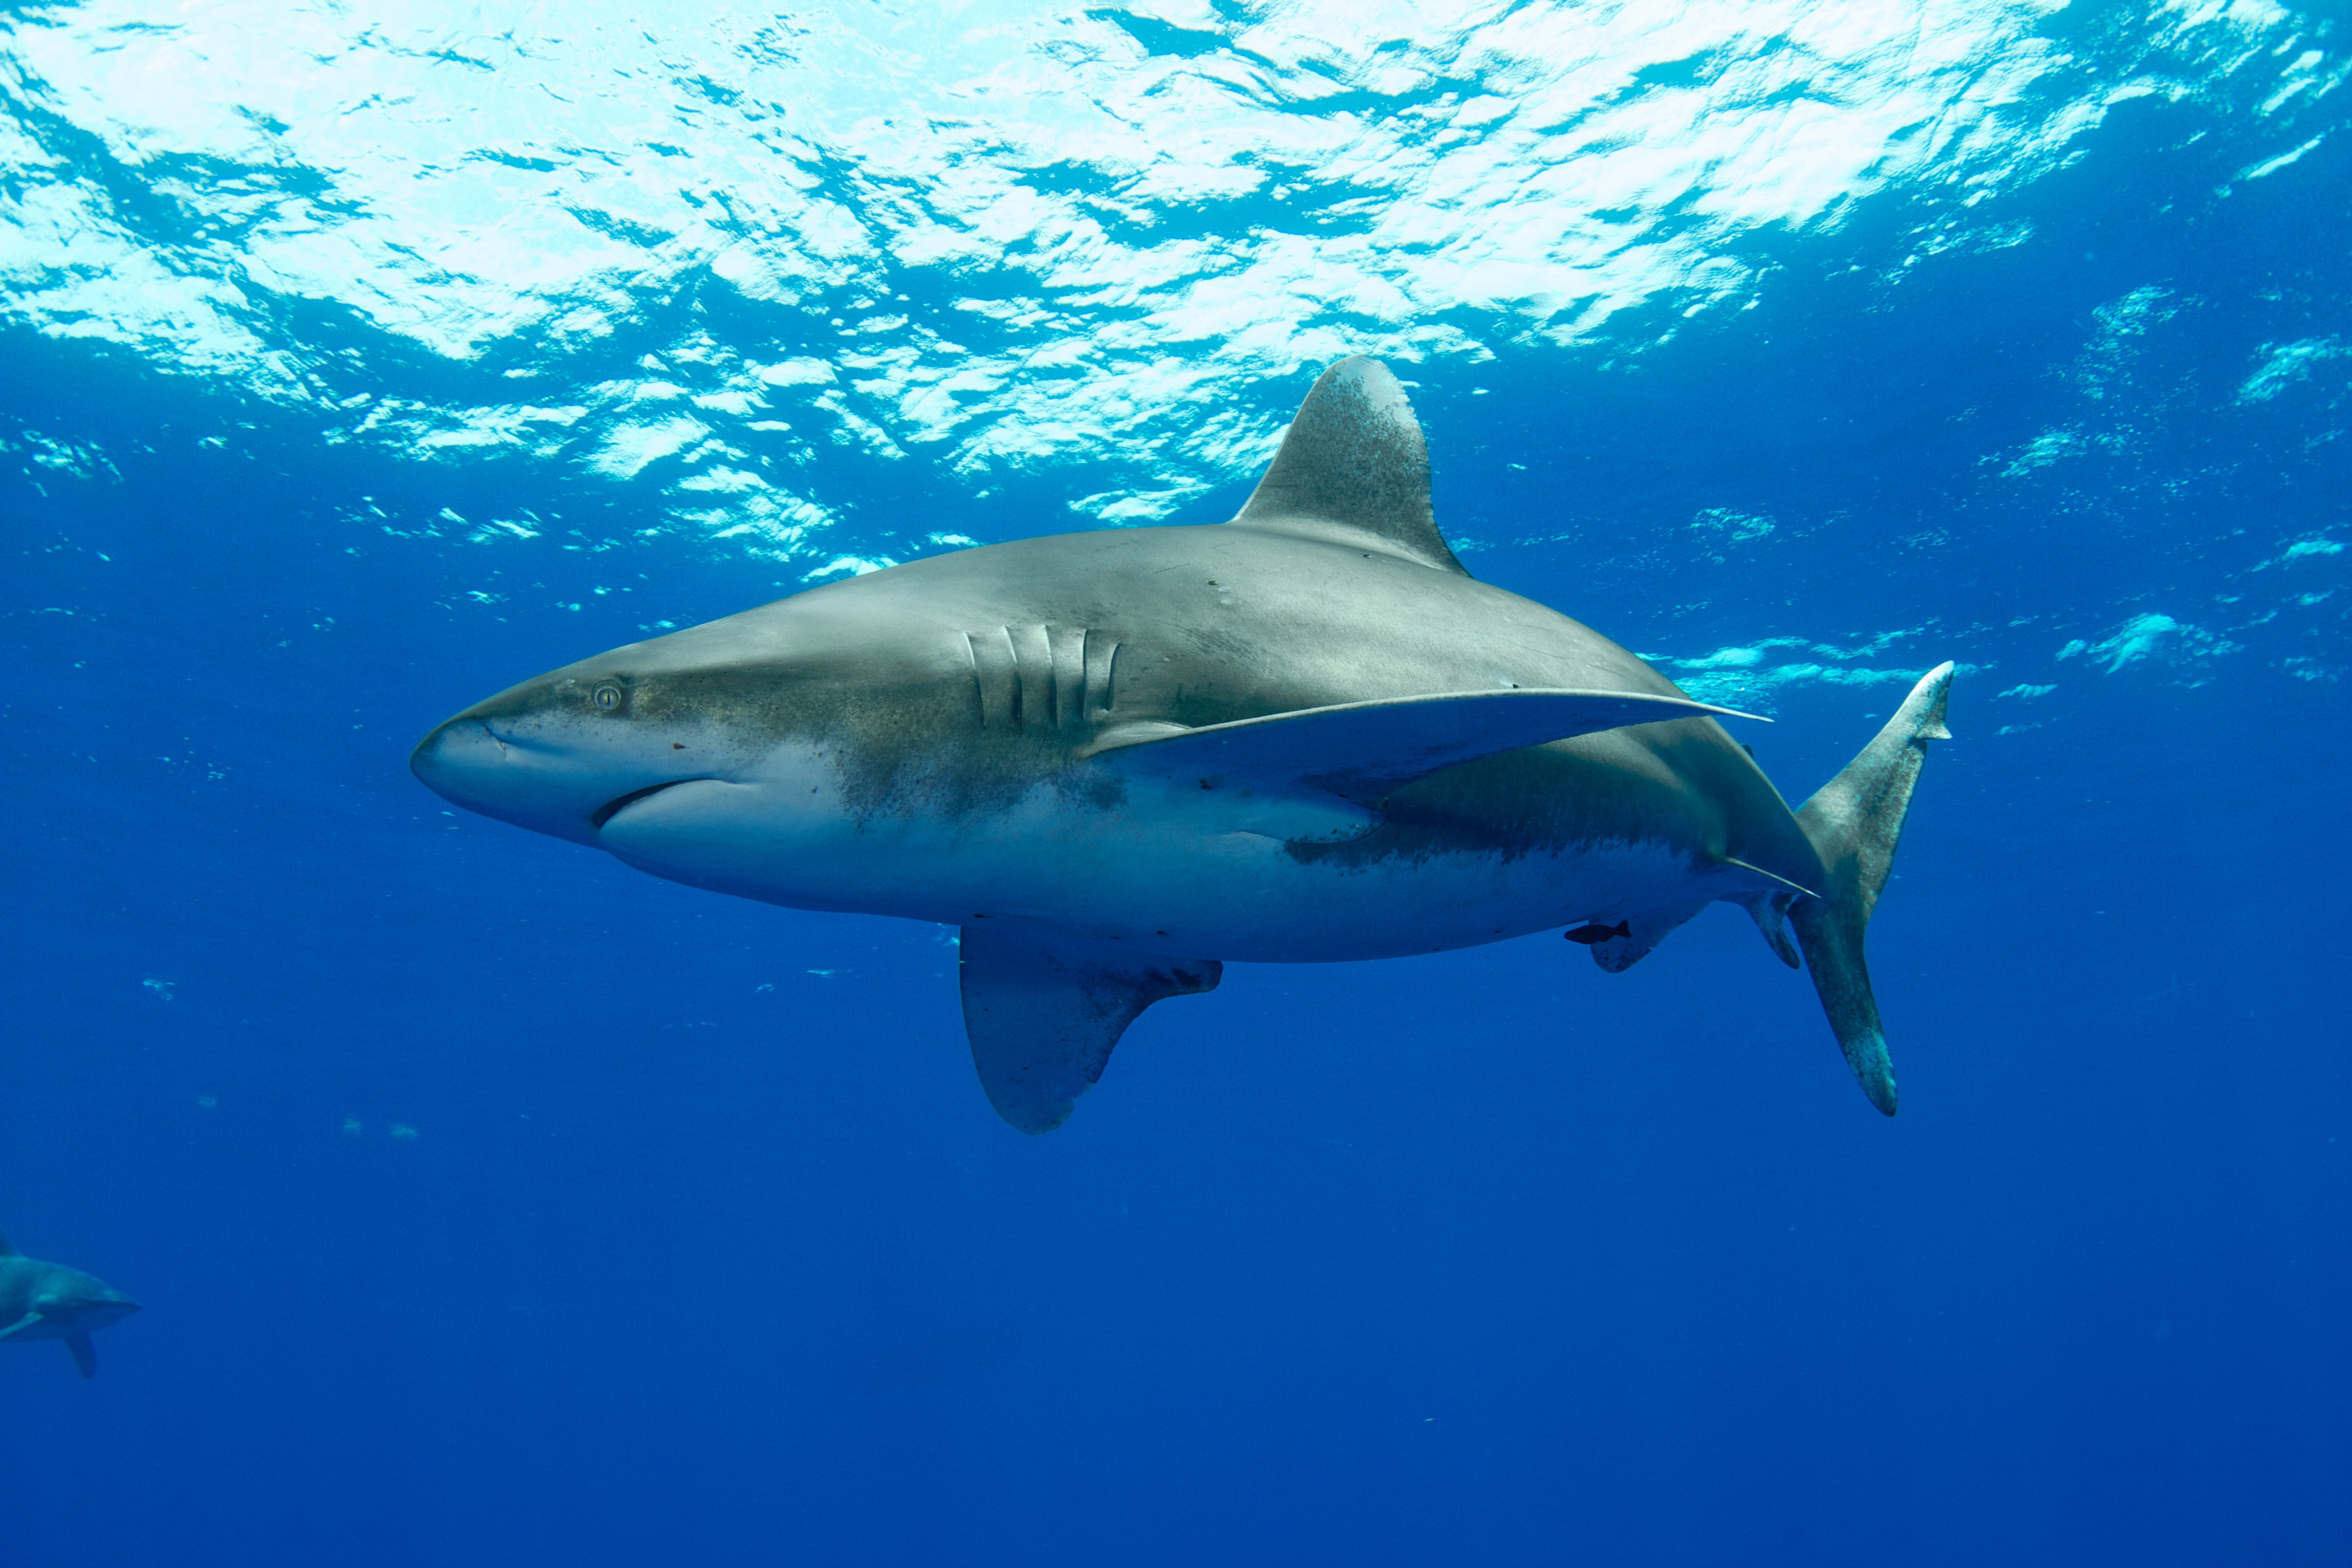 oceanic whitetip sharks, Bahamas, May 2012 (Norbert Wu&mdash;Getty Images/Minden Pictures RM)